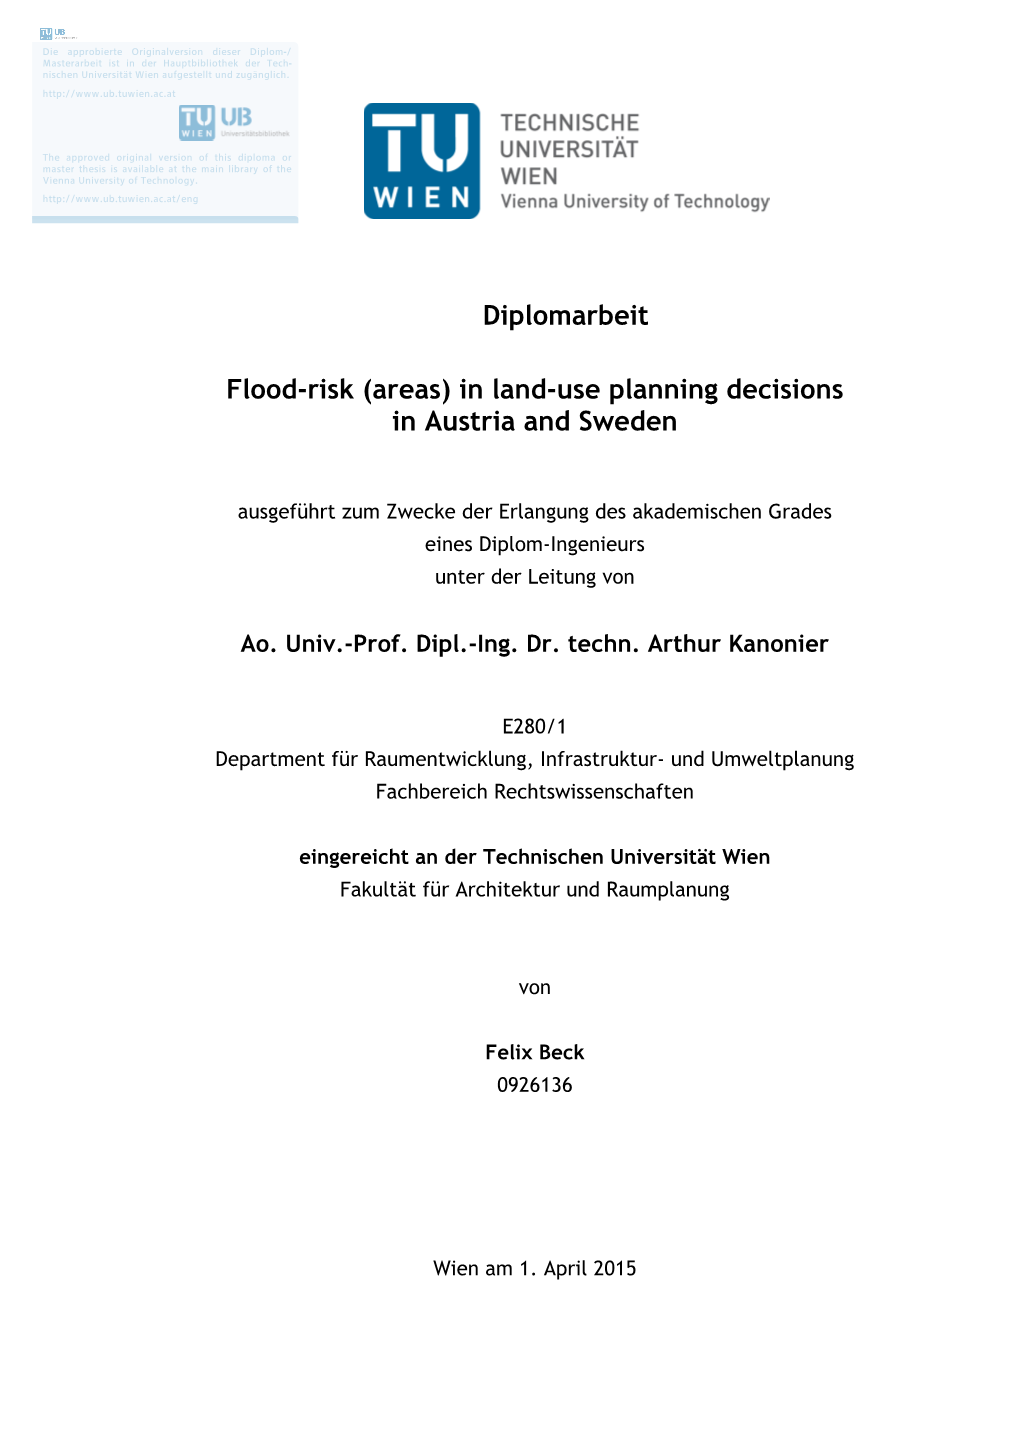 Diplomarbeit Flood-Risk (Areas) in Land-Use Planning Decisions in Austria